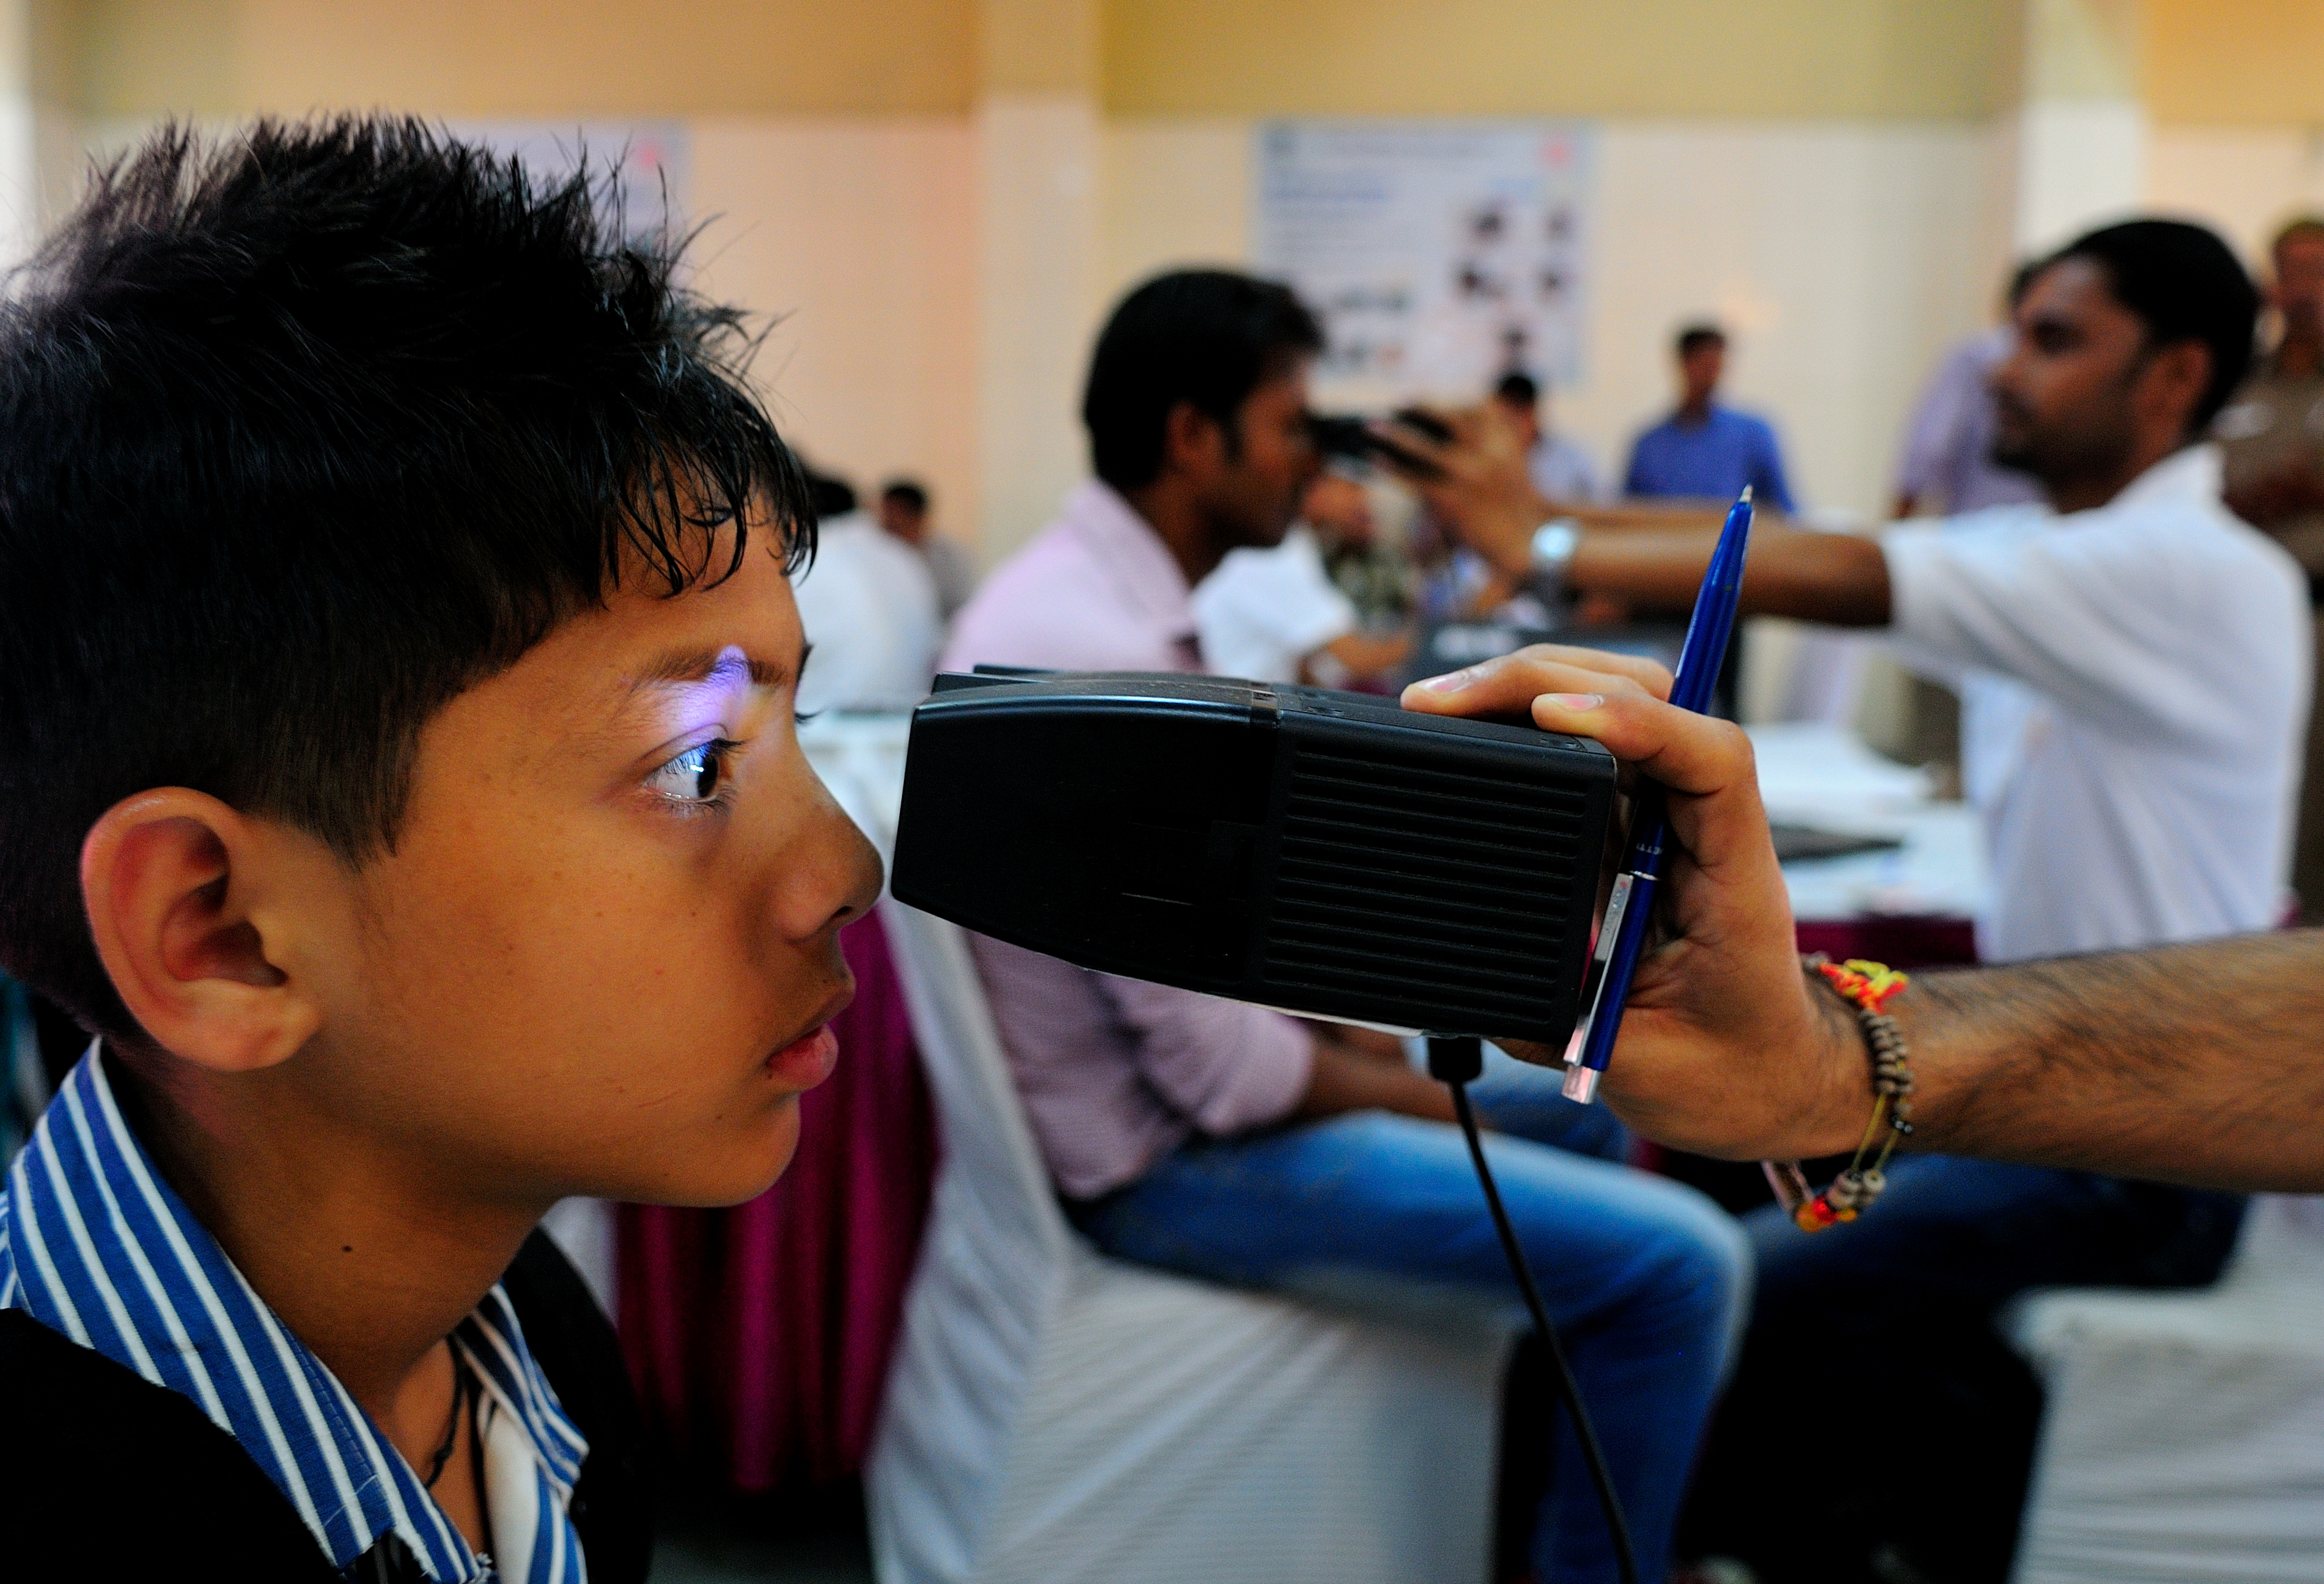 APRIL 12, 2013: A young boy has his iris scanned for an Aadhaar card, New Delhi (Mint&mdash;Hindustan Times via Getty Images)